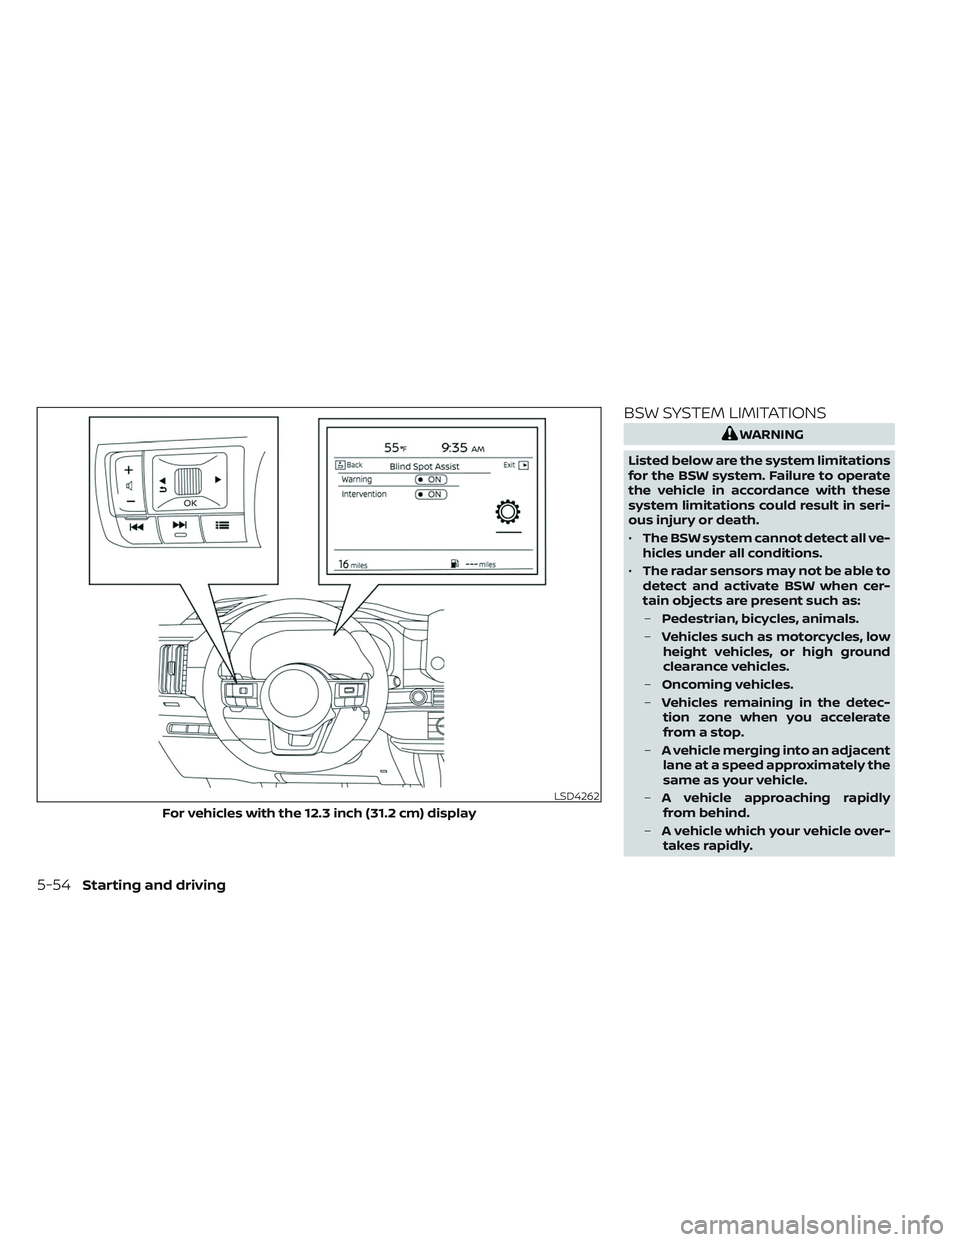 NISSAN PATHFINDER 2022  Owner´s Manual BSW SYSTEM LIMITATIONS
WARNING
Listed below are the system limitations
for the BSW system. Failure to operate
the vehicle in accordance with these
system limitations could result in seri-
ous injury o